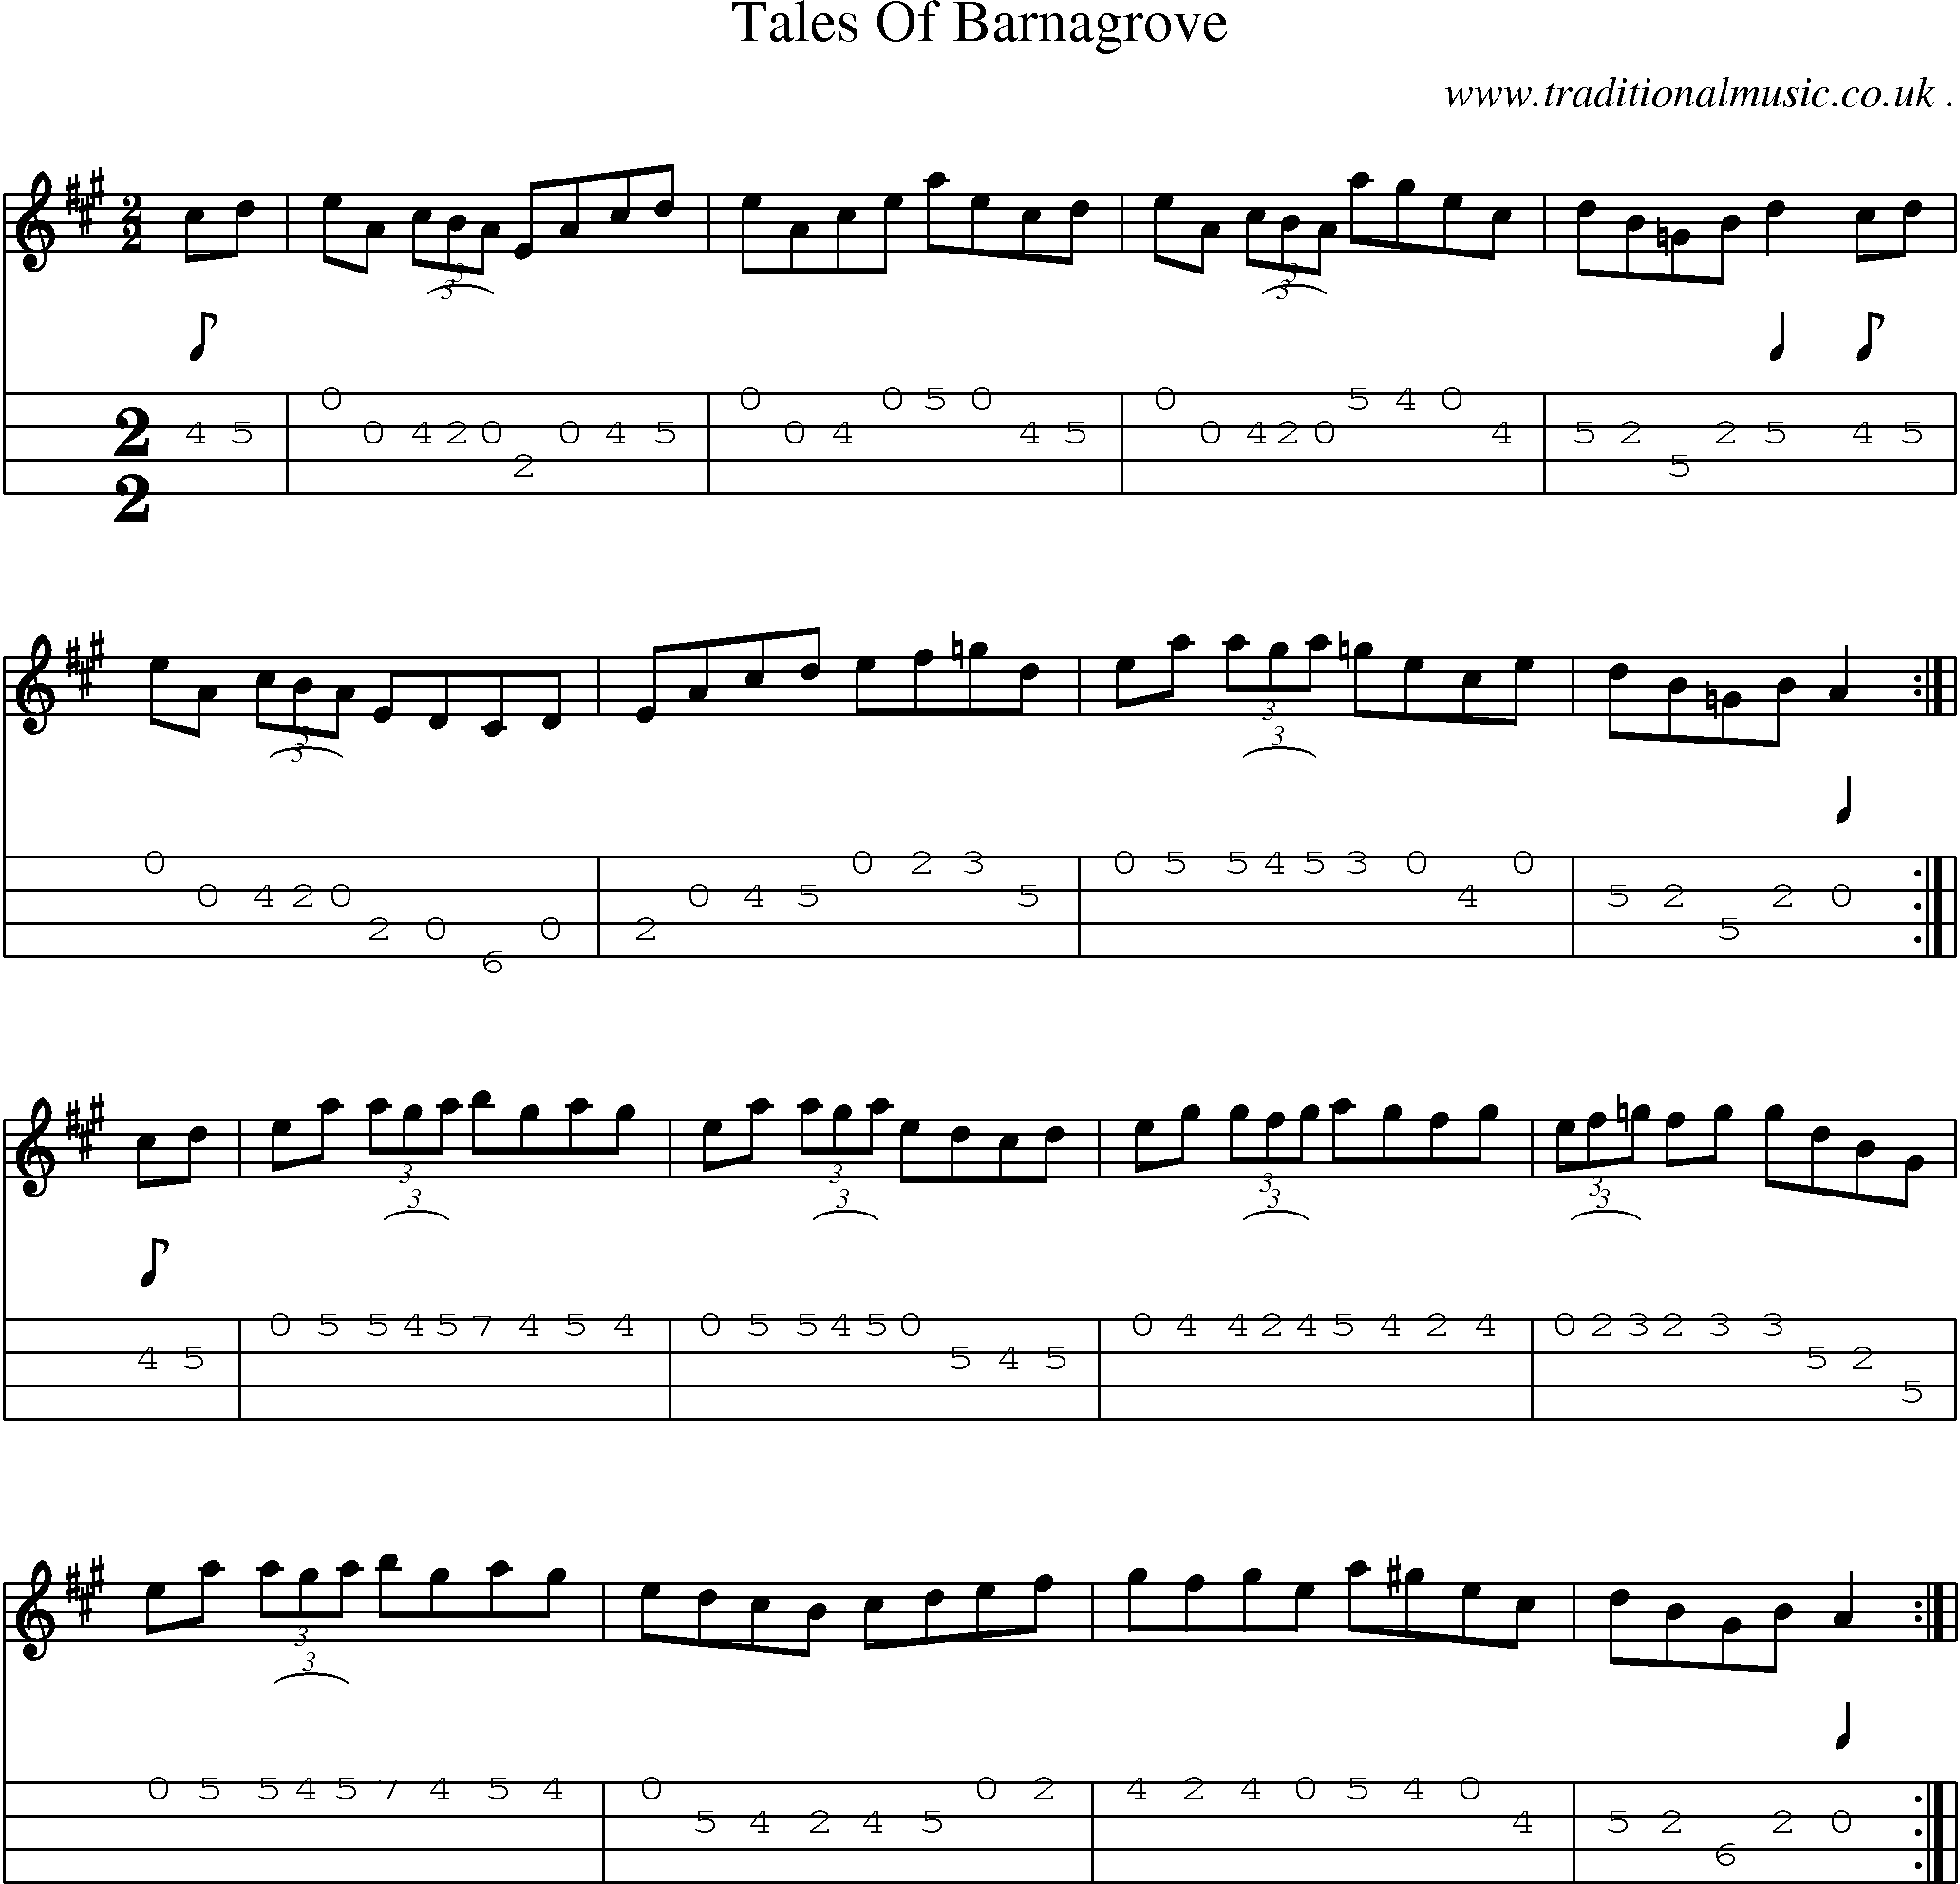 Sheet-Music and Mandolin Tabs for Tales Of Barnagrove